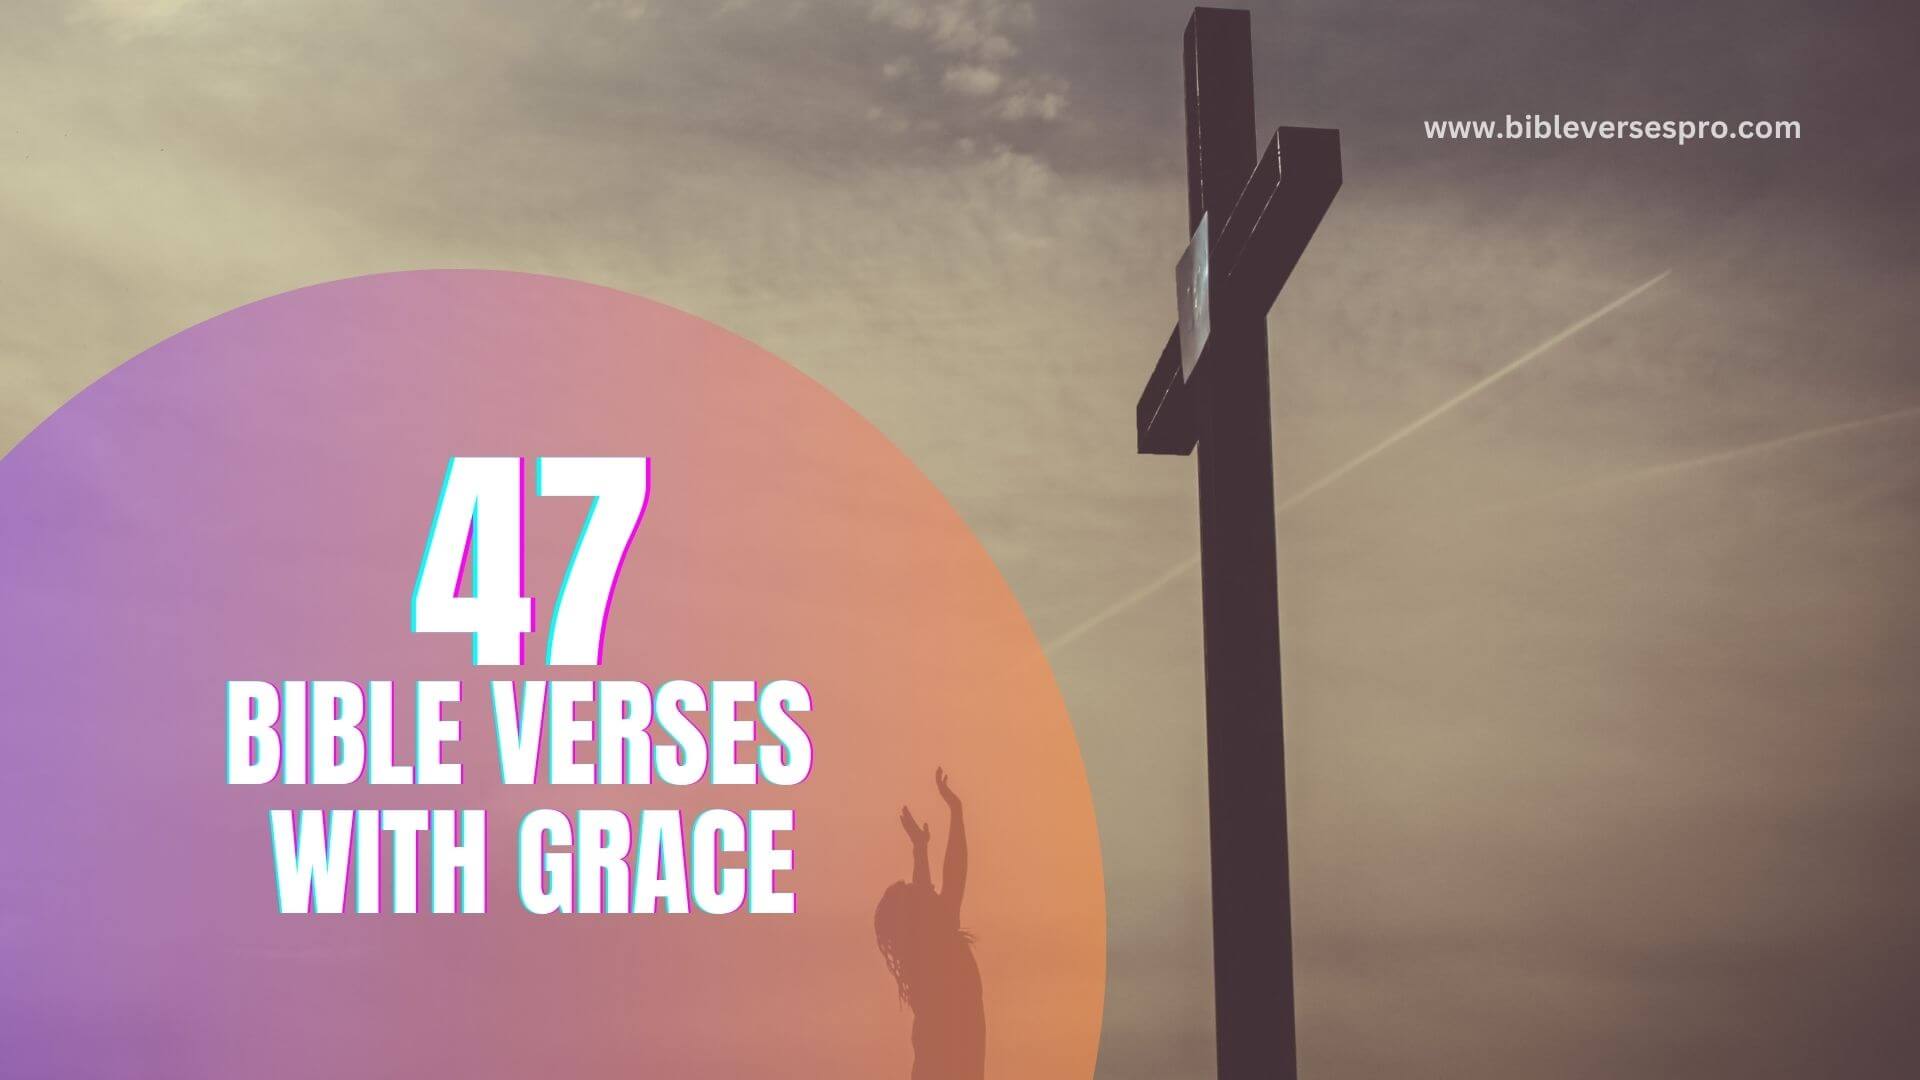 BIBLE VERSES WITH GRACE (1)